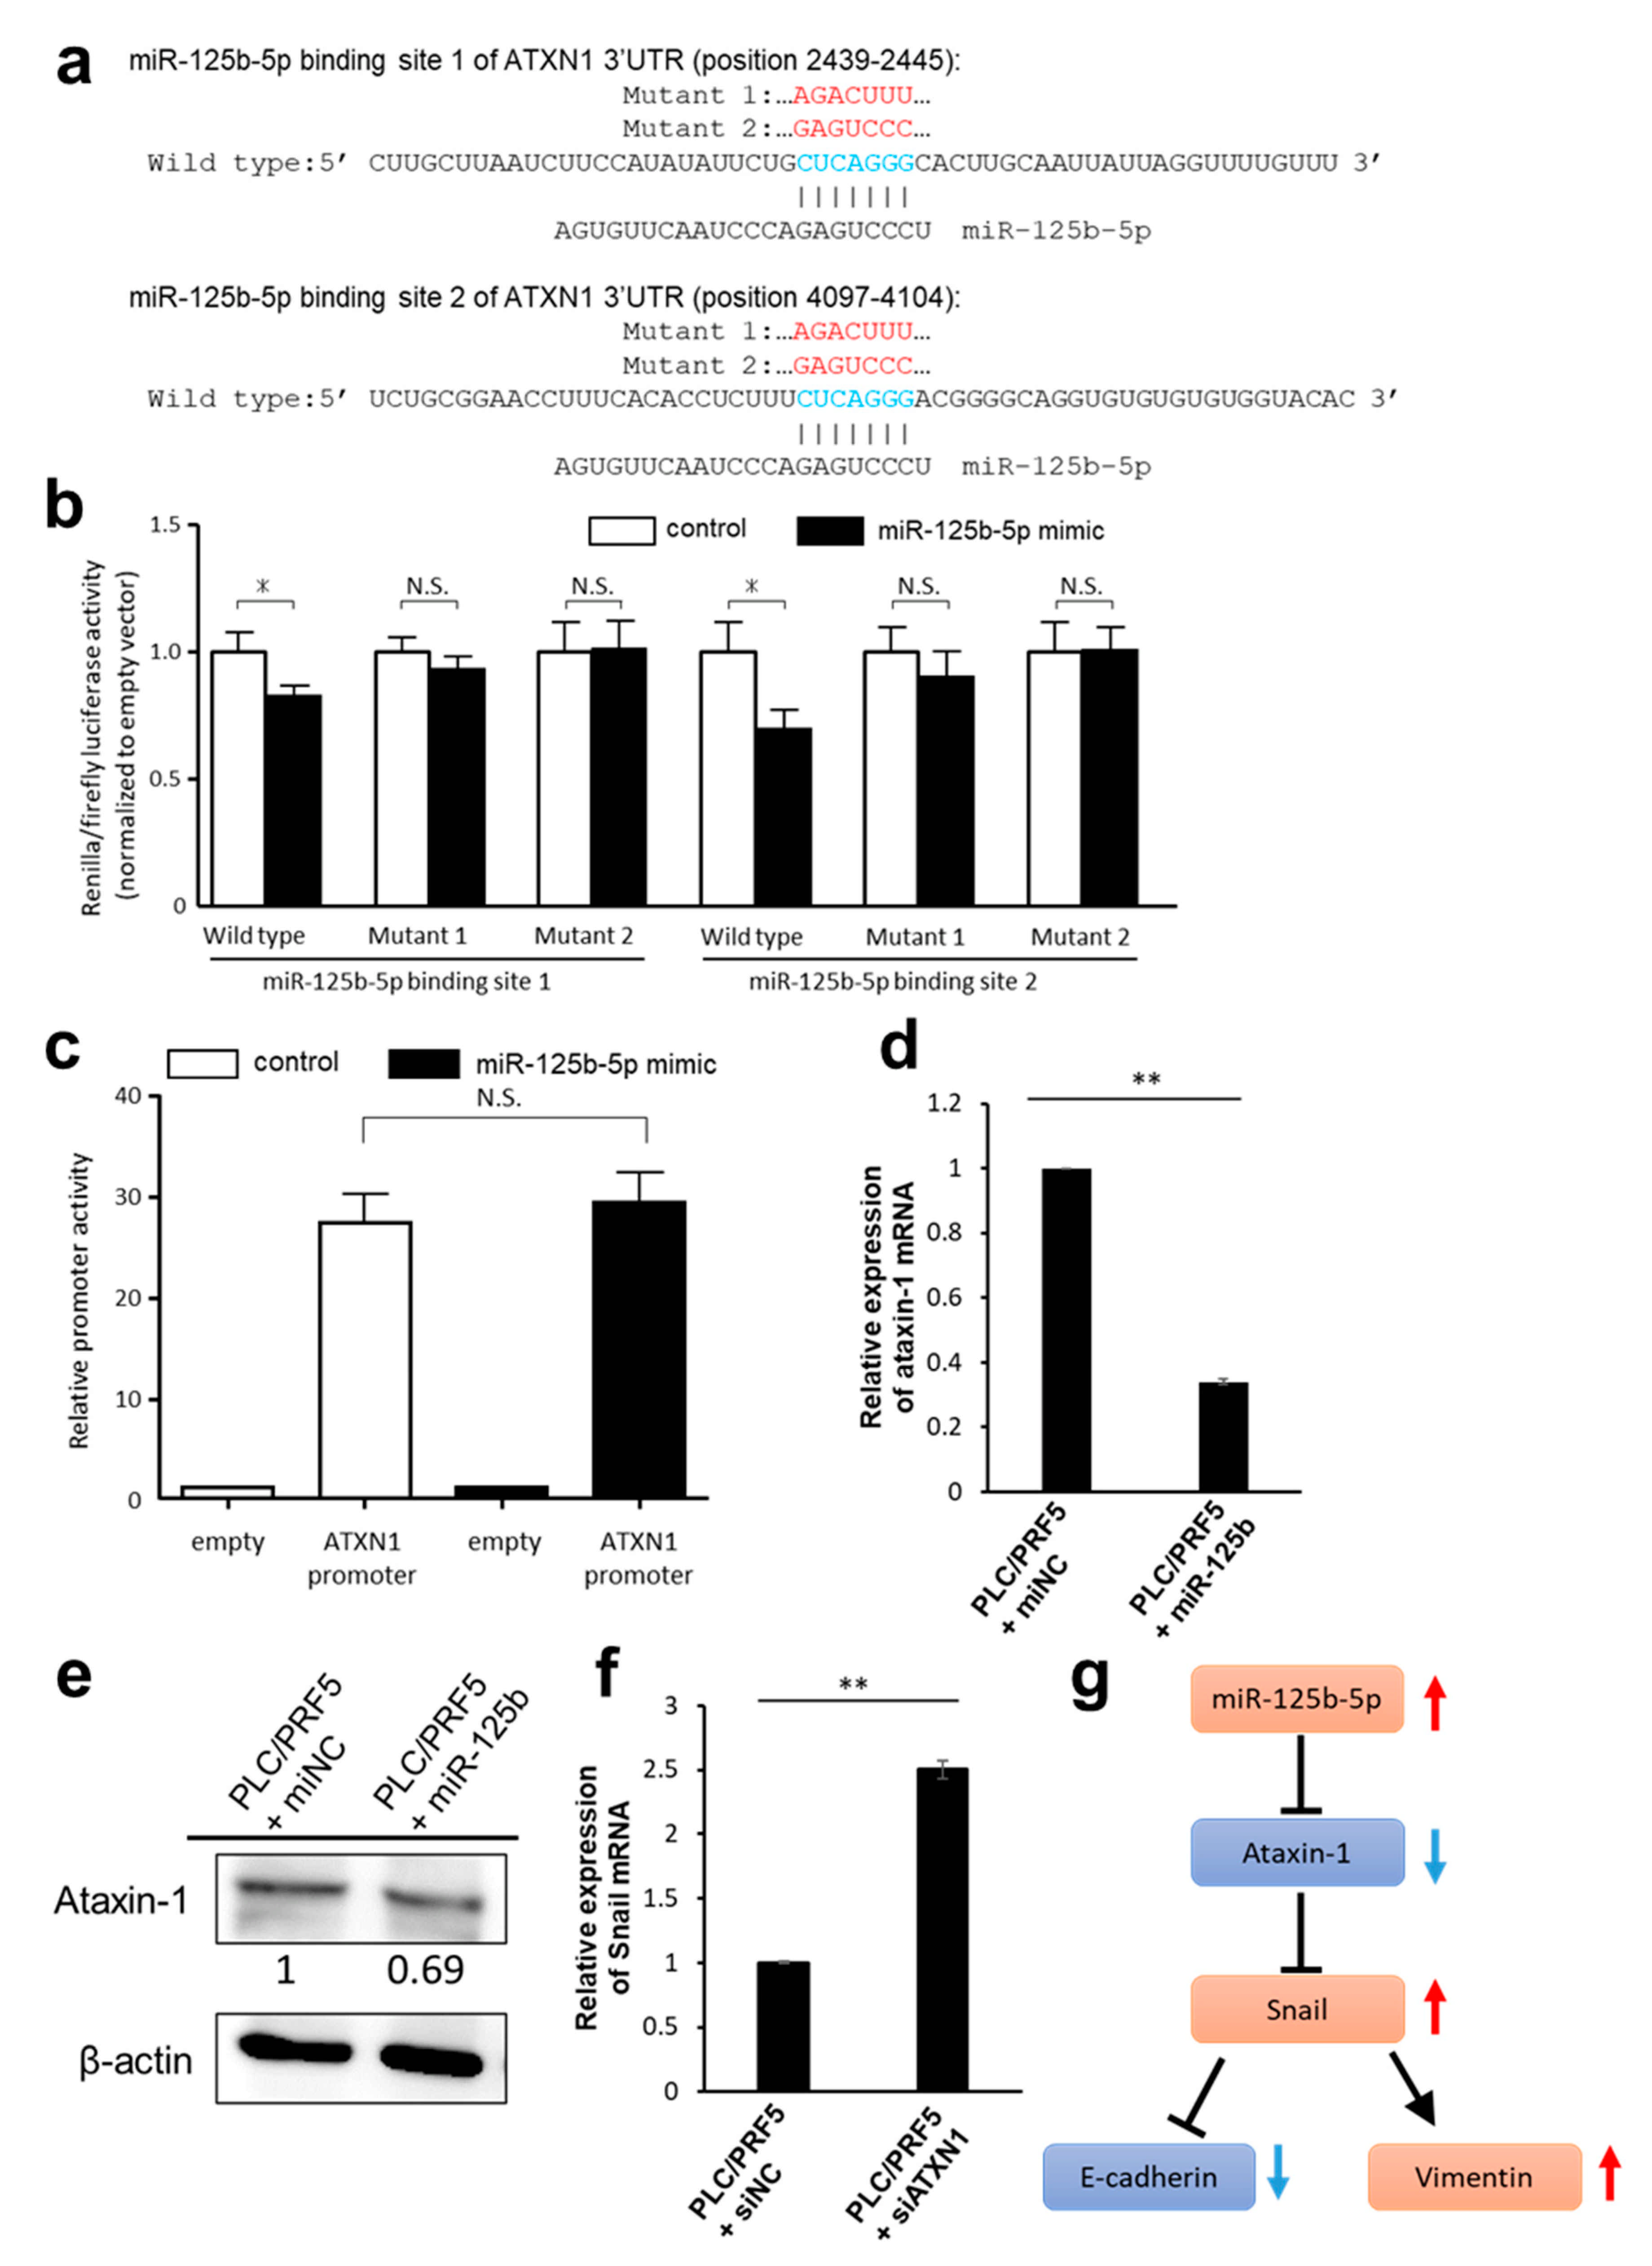 Cancers | Free Full-Text | MiR-125b-5p Is Involved in Sorafenib Resistance  through Ataxin-1-Mediated Epithelial-Mesenchymal Transition in  Hepatocellular Carcinoma